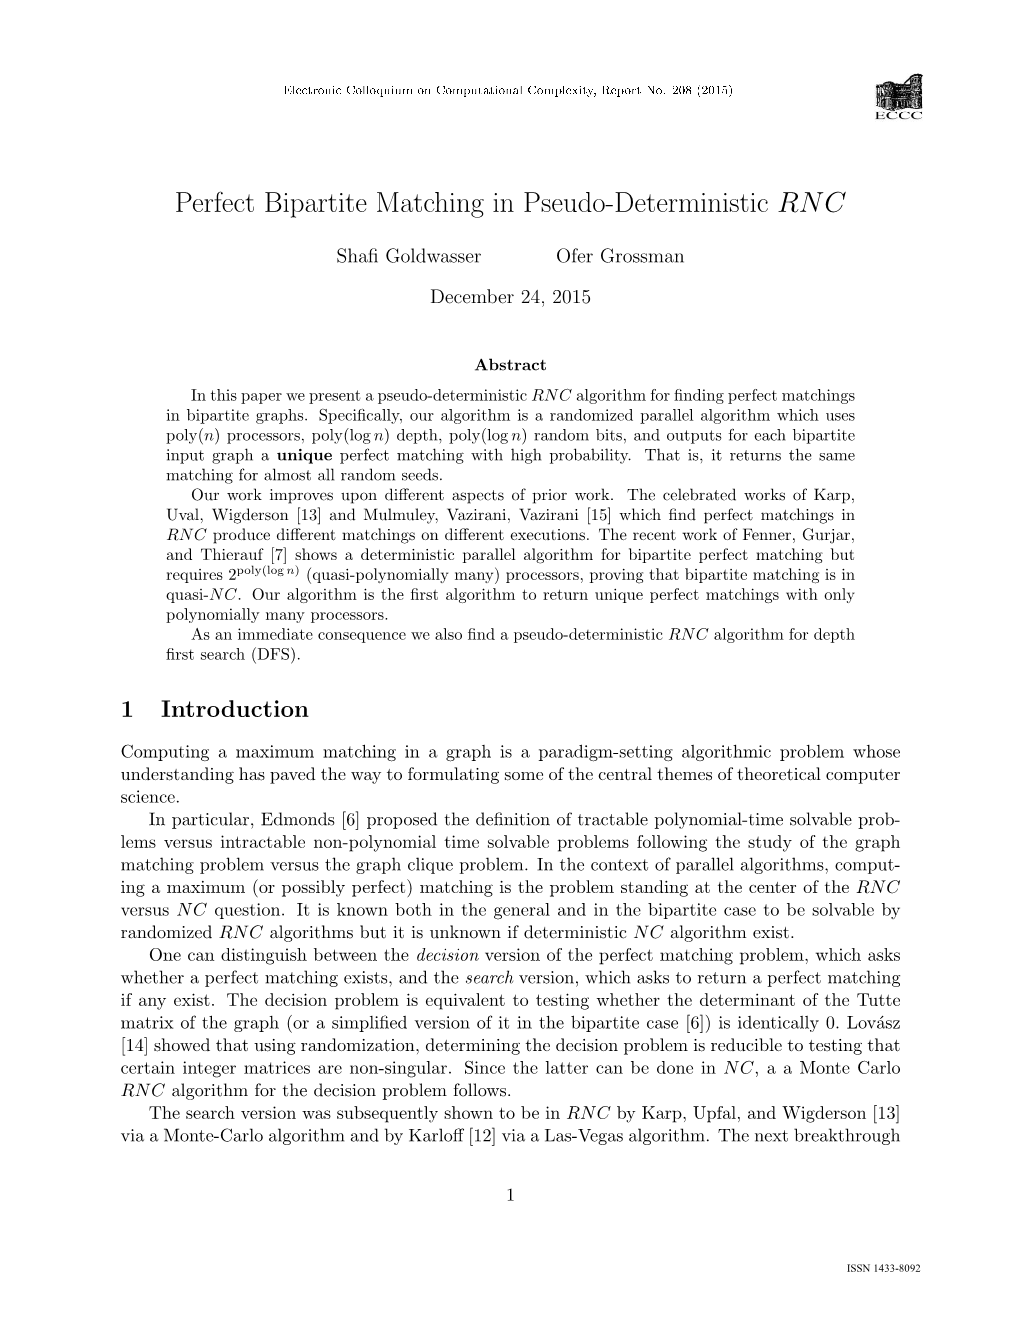 Perfect Bipartite Matching in Pseudo-Deterministic RNC